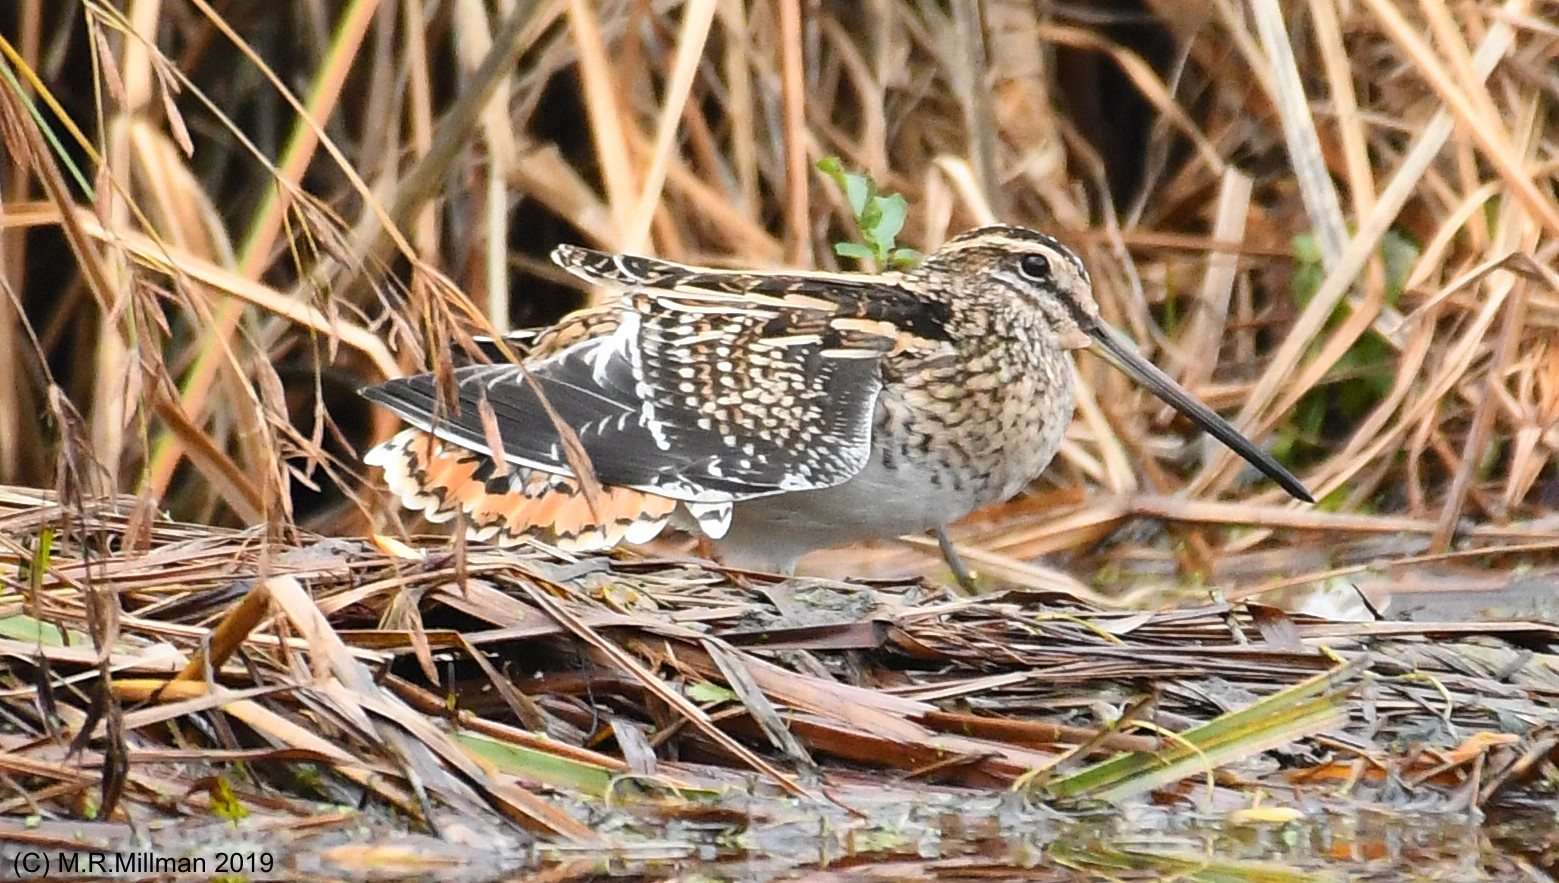 Snipe by ON BEHALF of MarcMILLMAN at Clennan Valley